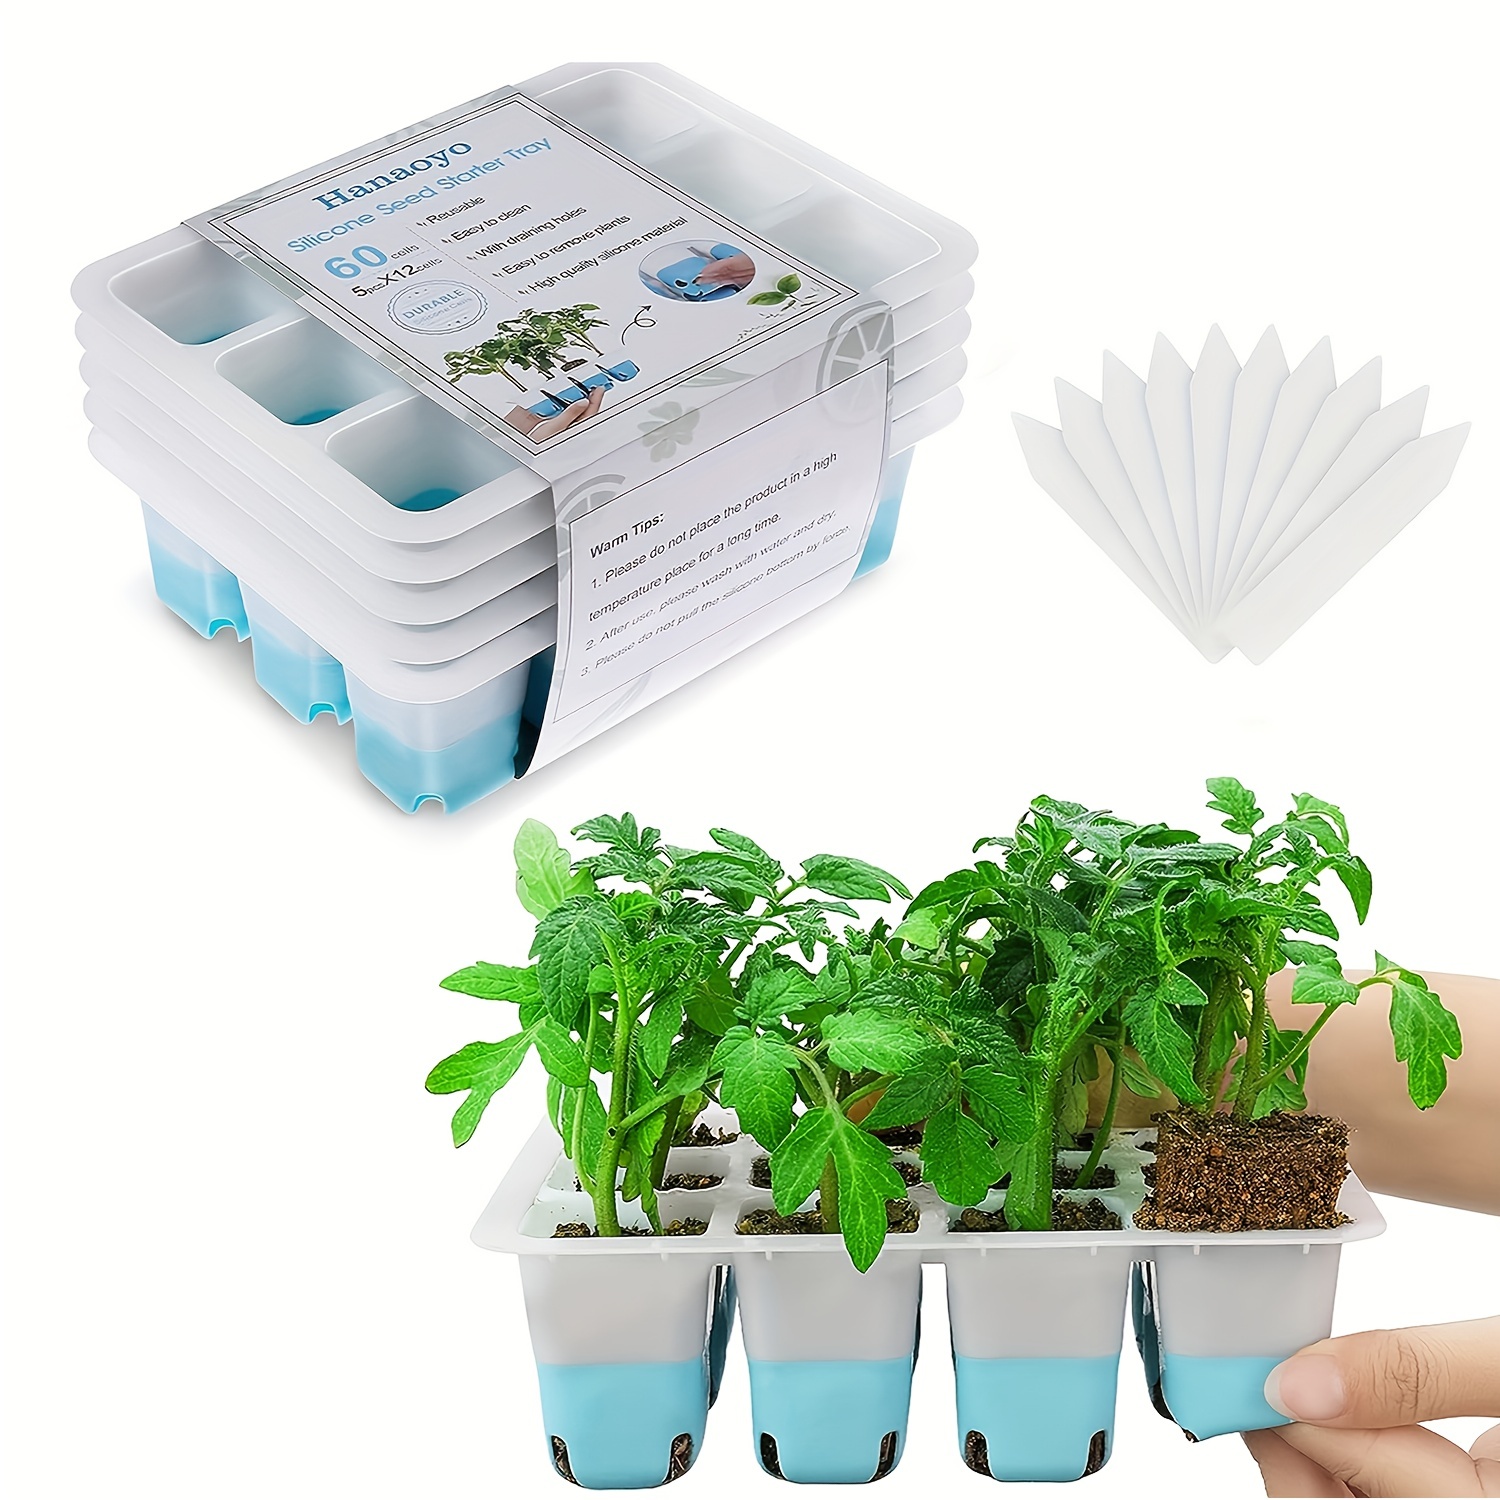 Hanaoyo Reusable Seed Starter Tray, 2 Pcs Seed Starter Kit with Flexible Pop-Out Cells (24 Cells in Total), Seedling Starter Trays for Seed Starter